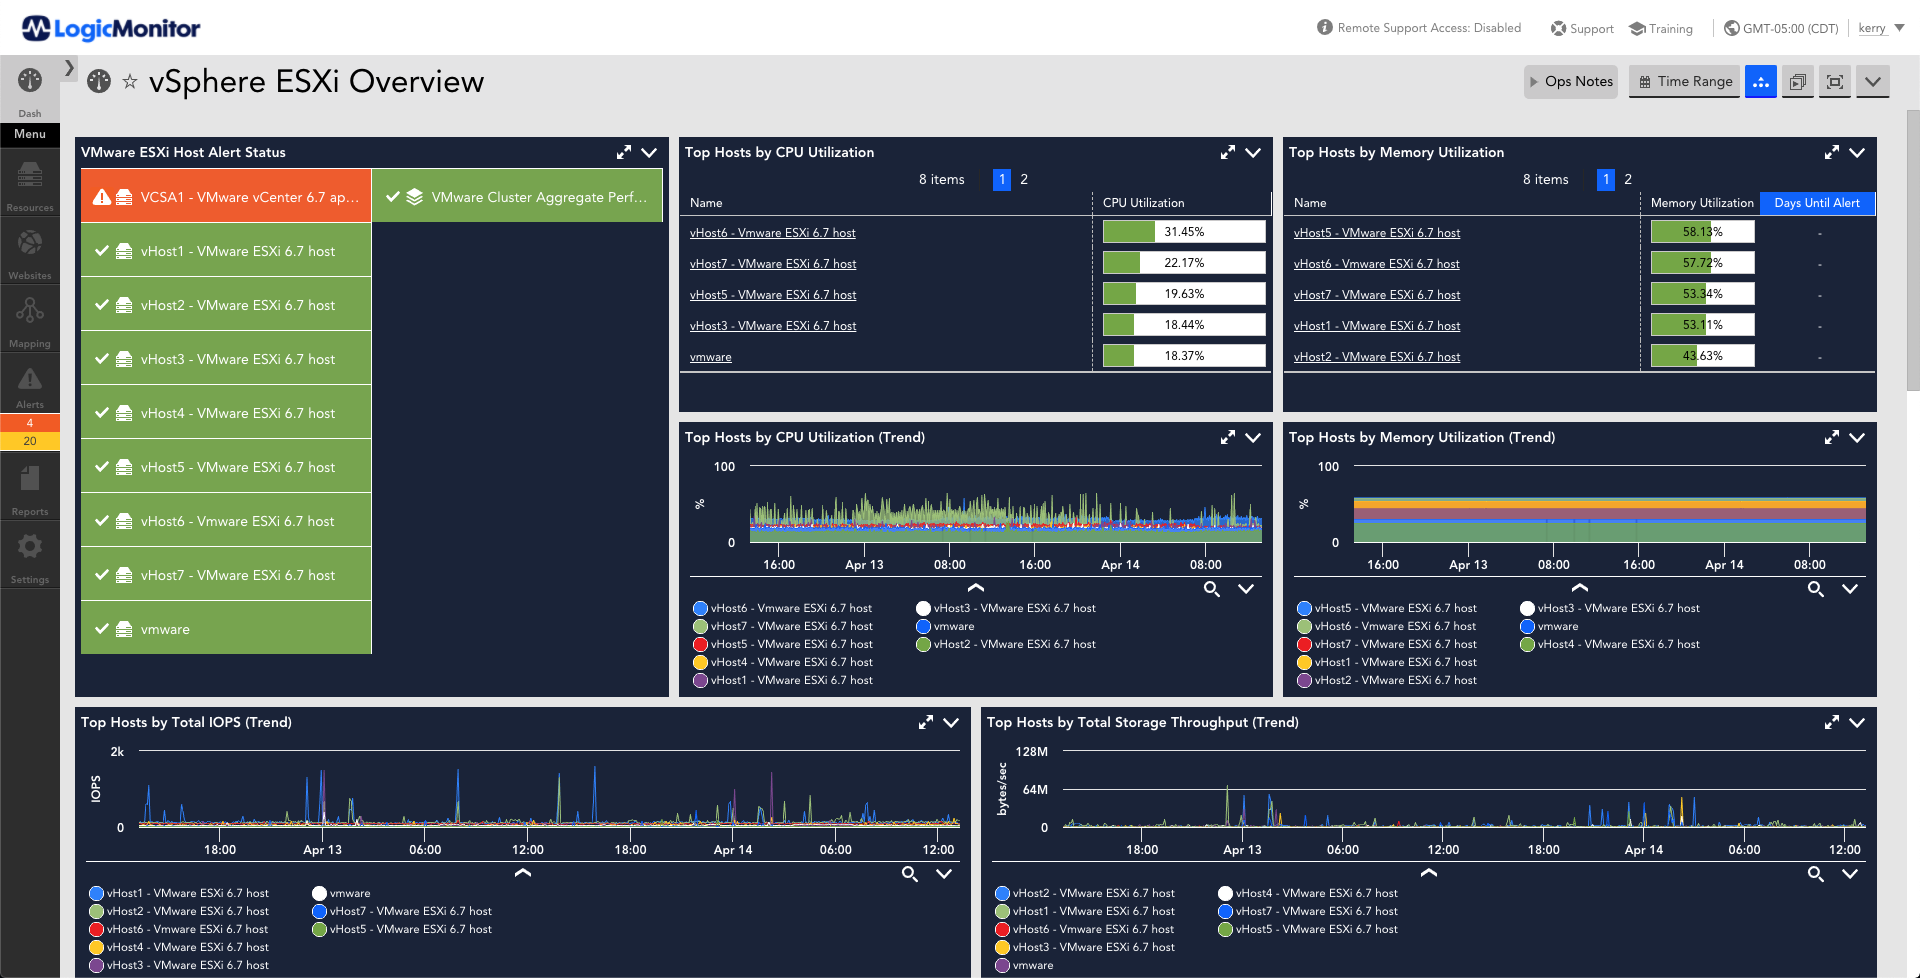 This dashboard provides an a listing of various metrics that are monitored for vSphere ESXi Overview. The metrics displayed are status, real-time CPU utilization, real-time memory utilization, CPU utilization over time, memory utilization over time, total IOPS over time, total storage throughput over time.